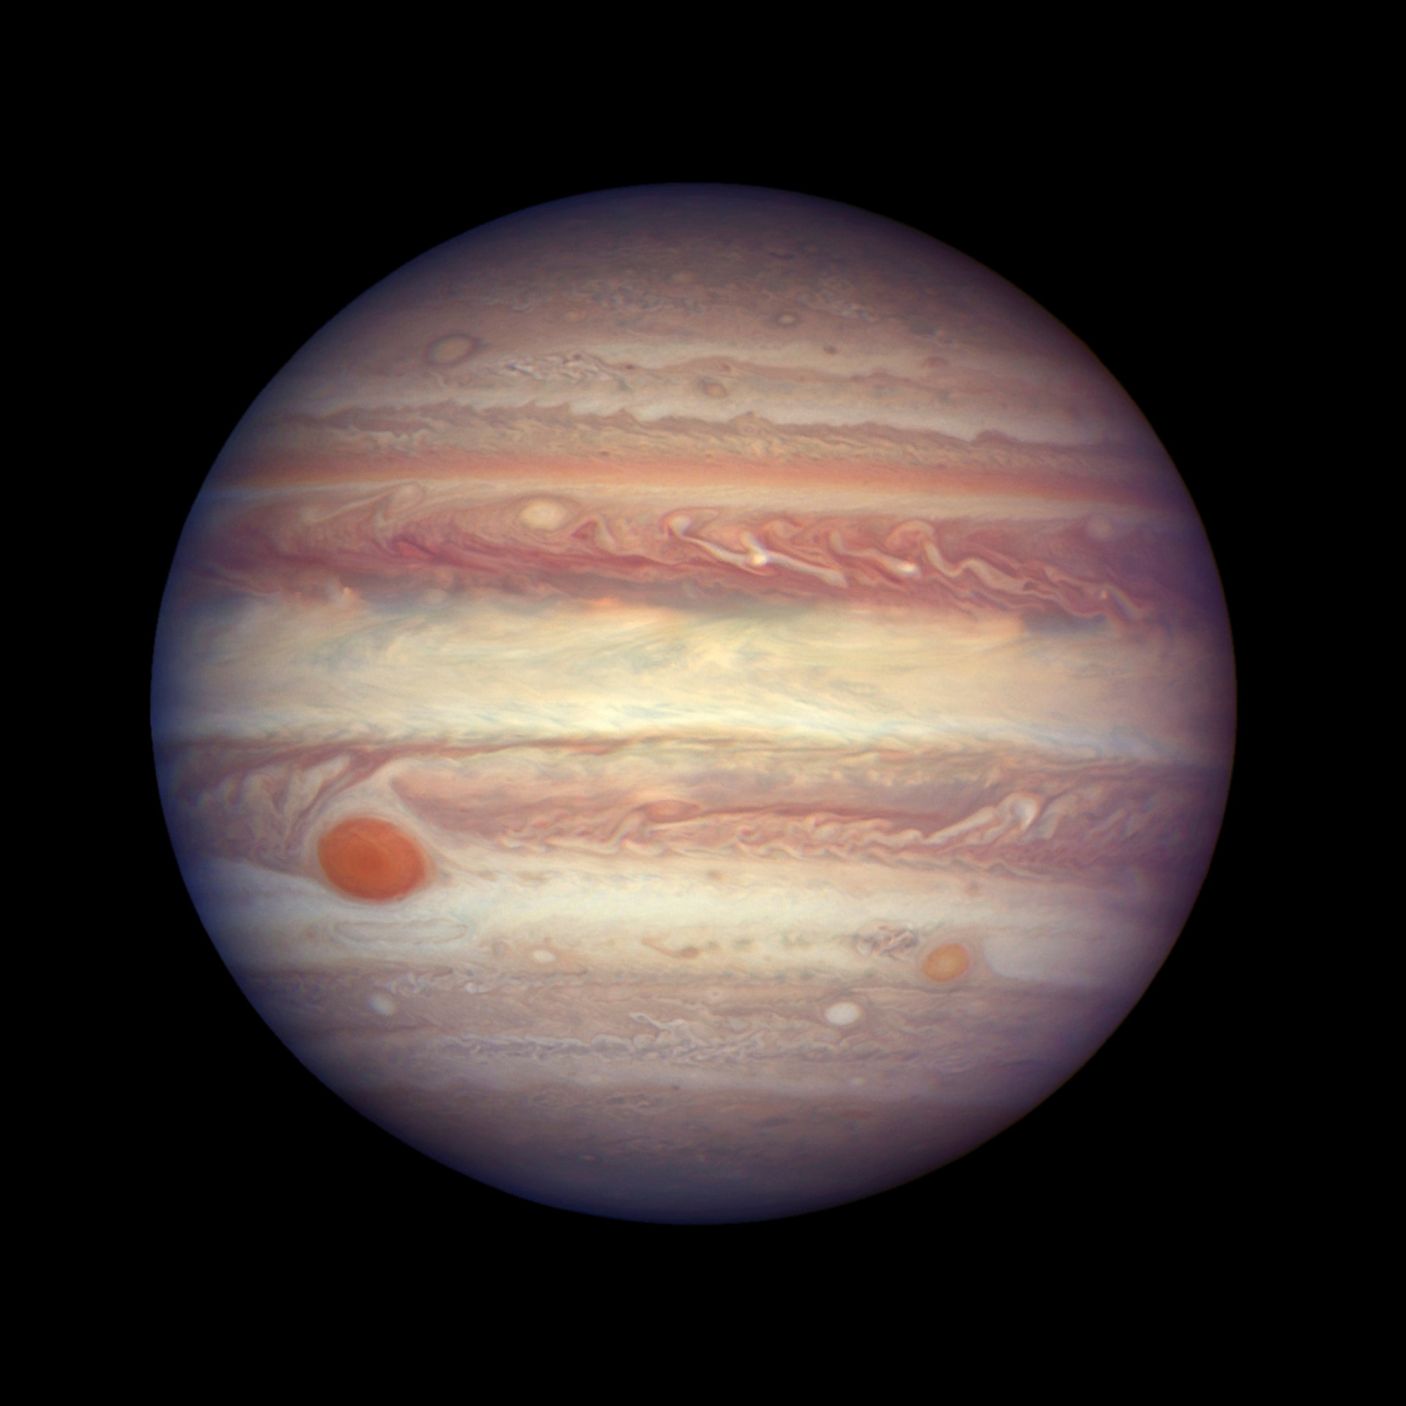 10 Moons Orbiting Jupiter Discovered, One ‘Oddball’ on a Collision Course